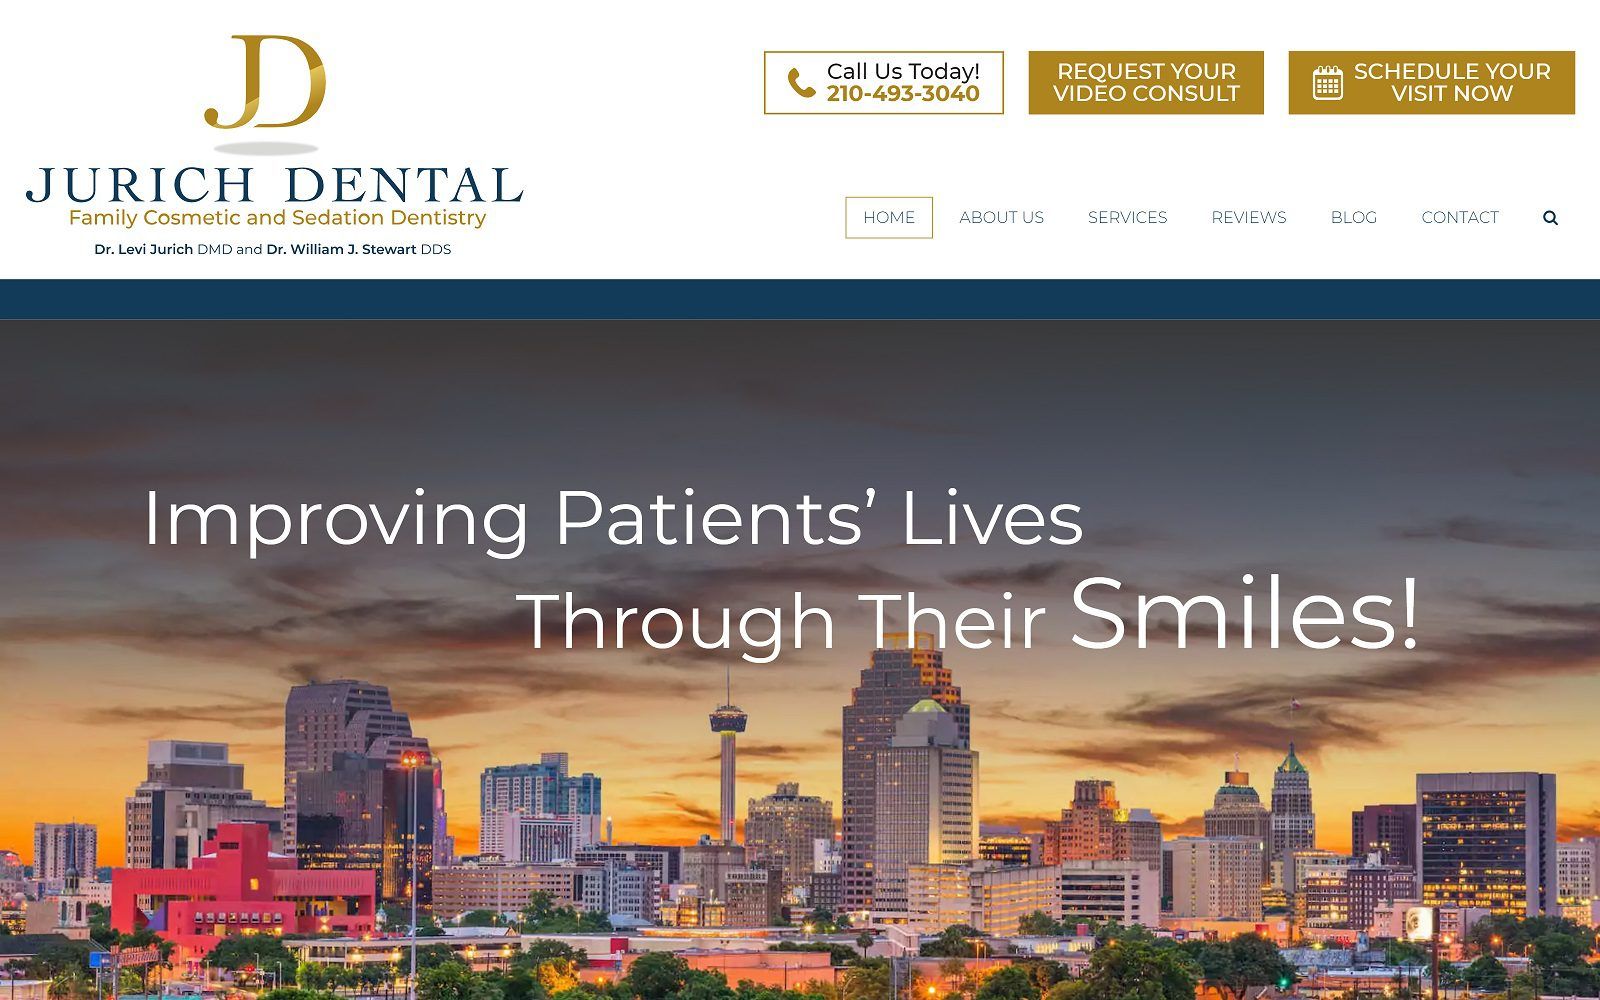 The screenshot of jurich dental family cosmetic and sedation dentistry website